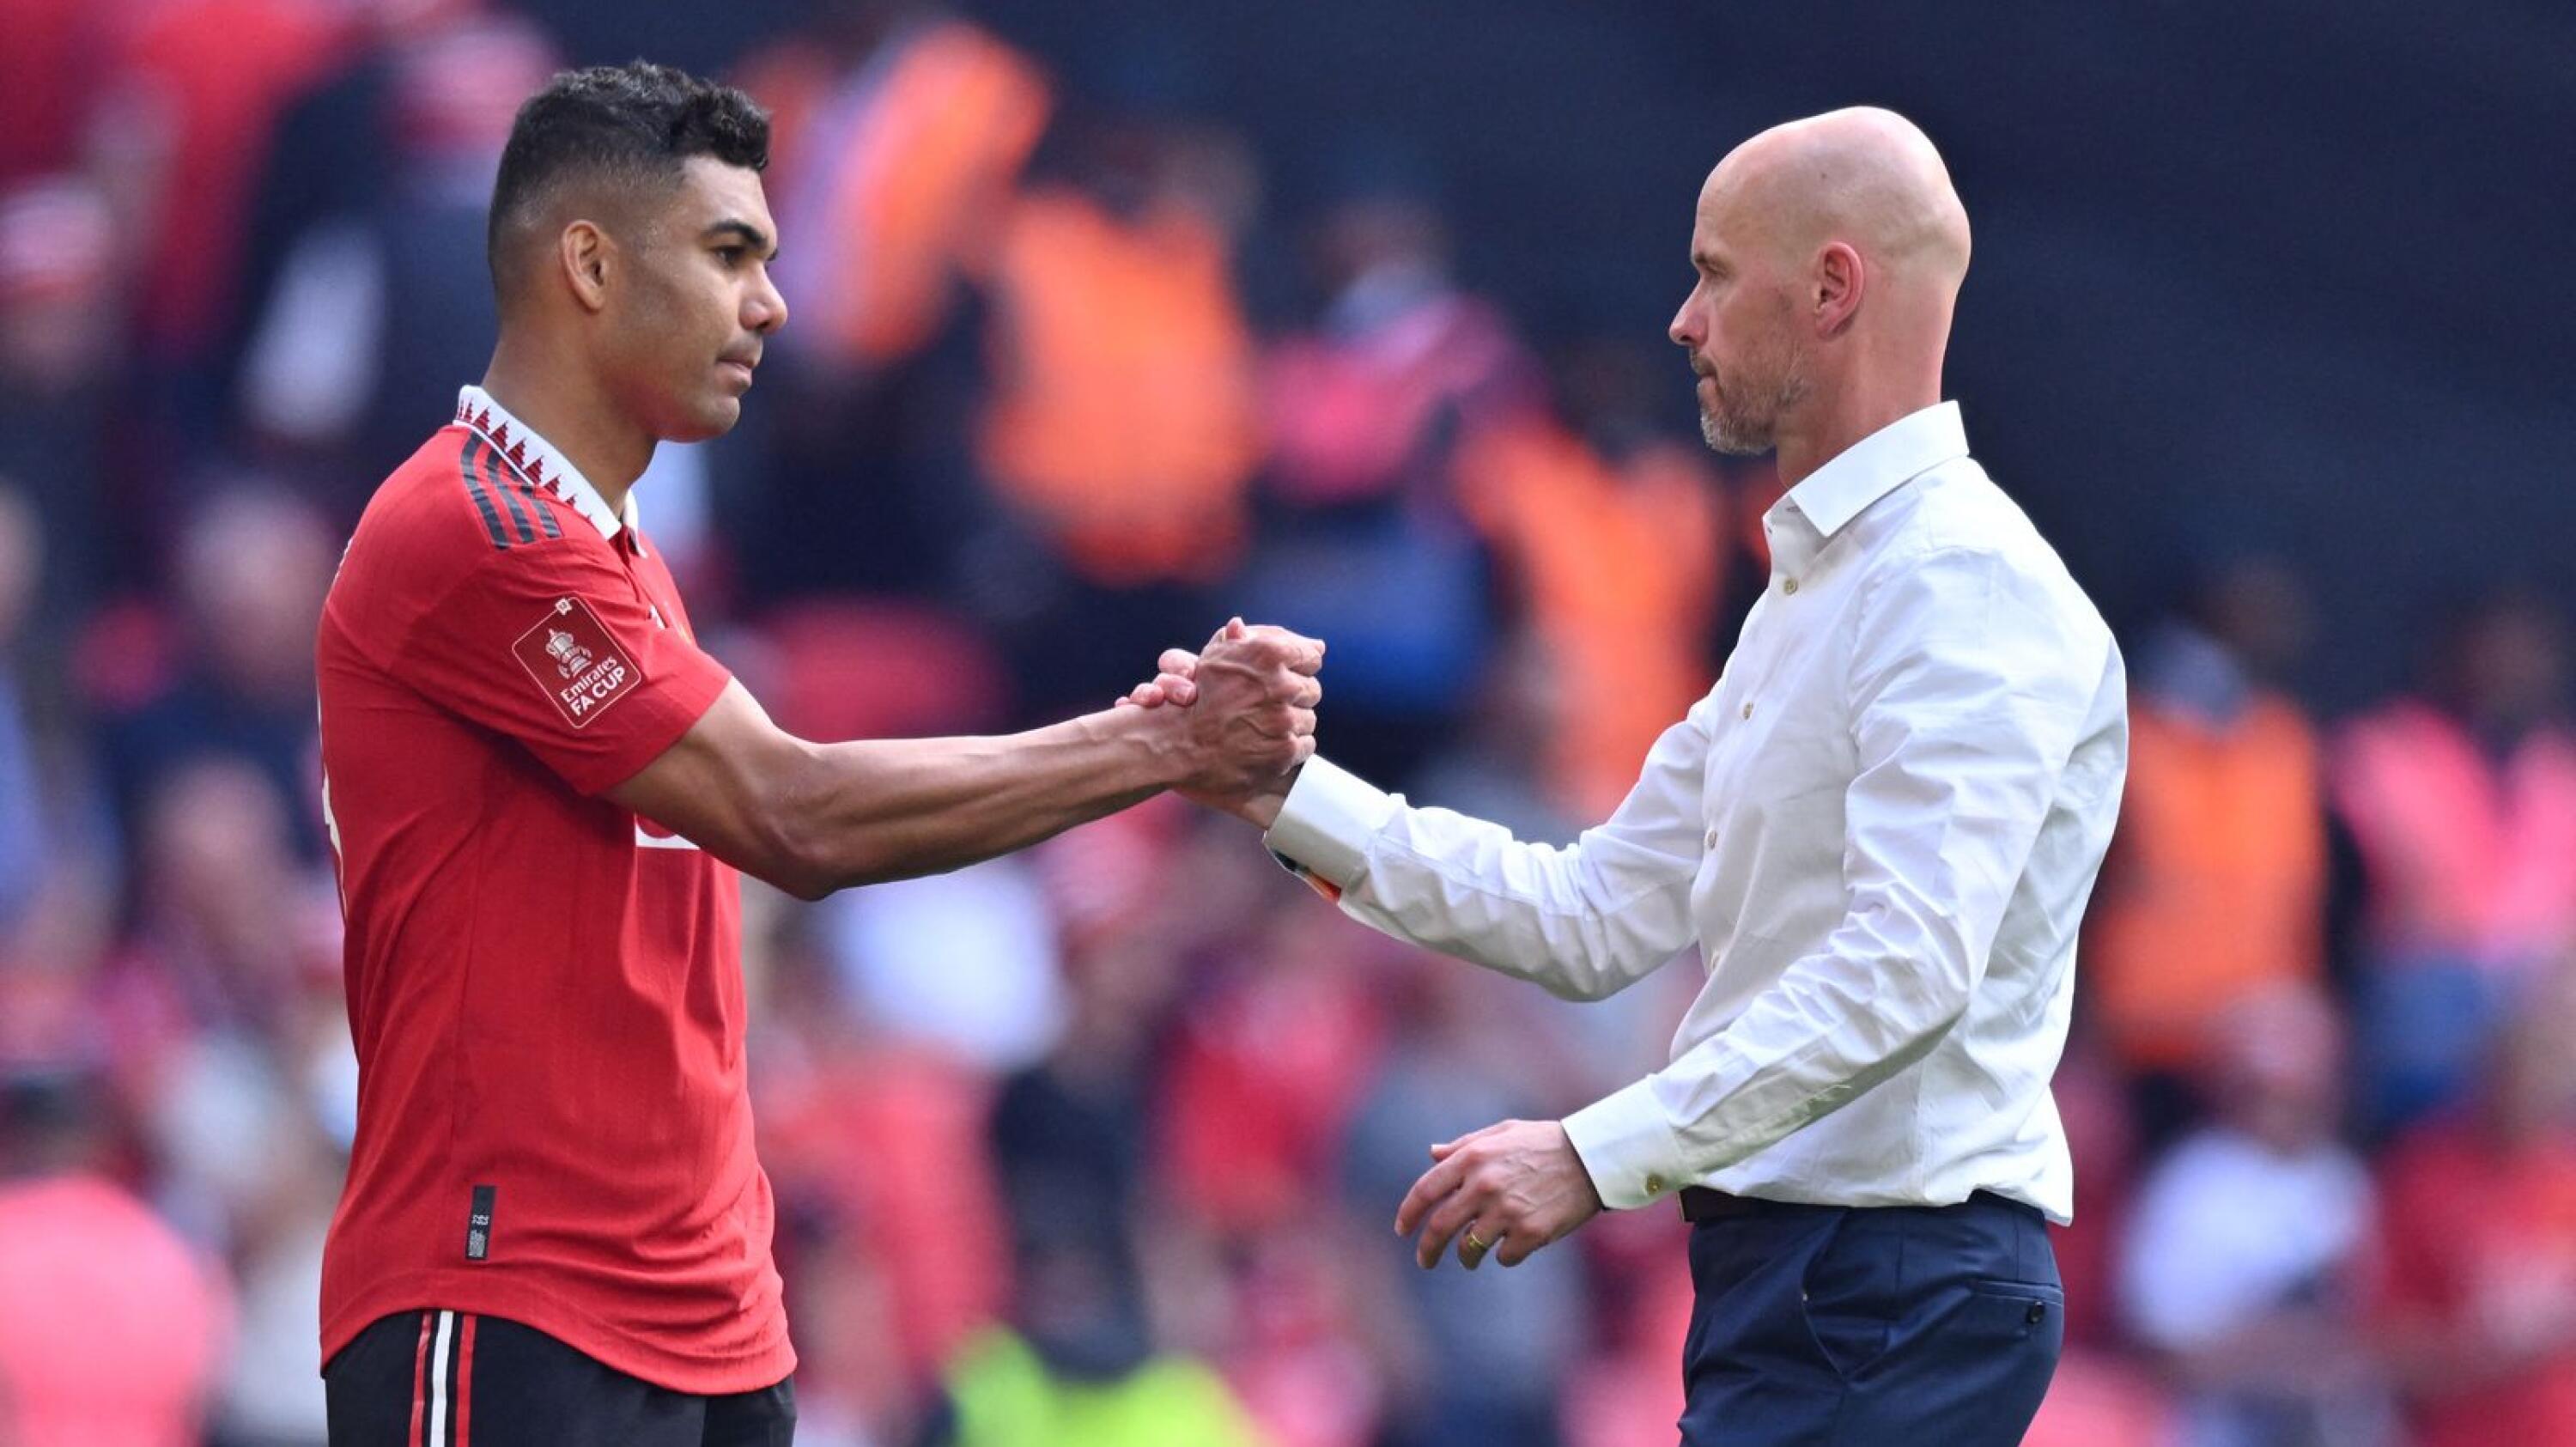 Manchester United manager Erik ten Hag consoles midfielder Casemiro after their FA Cup final loss to Manchester City at Wembley on Saturday